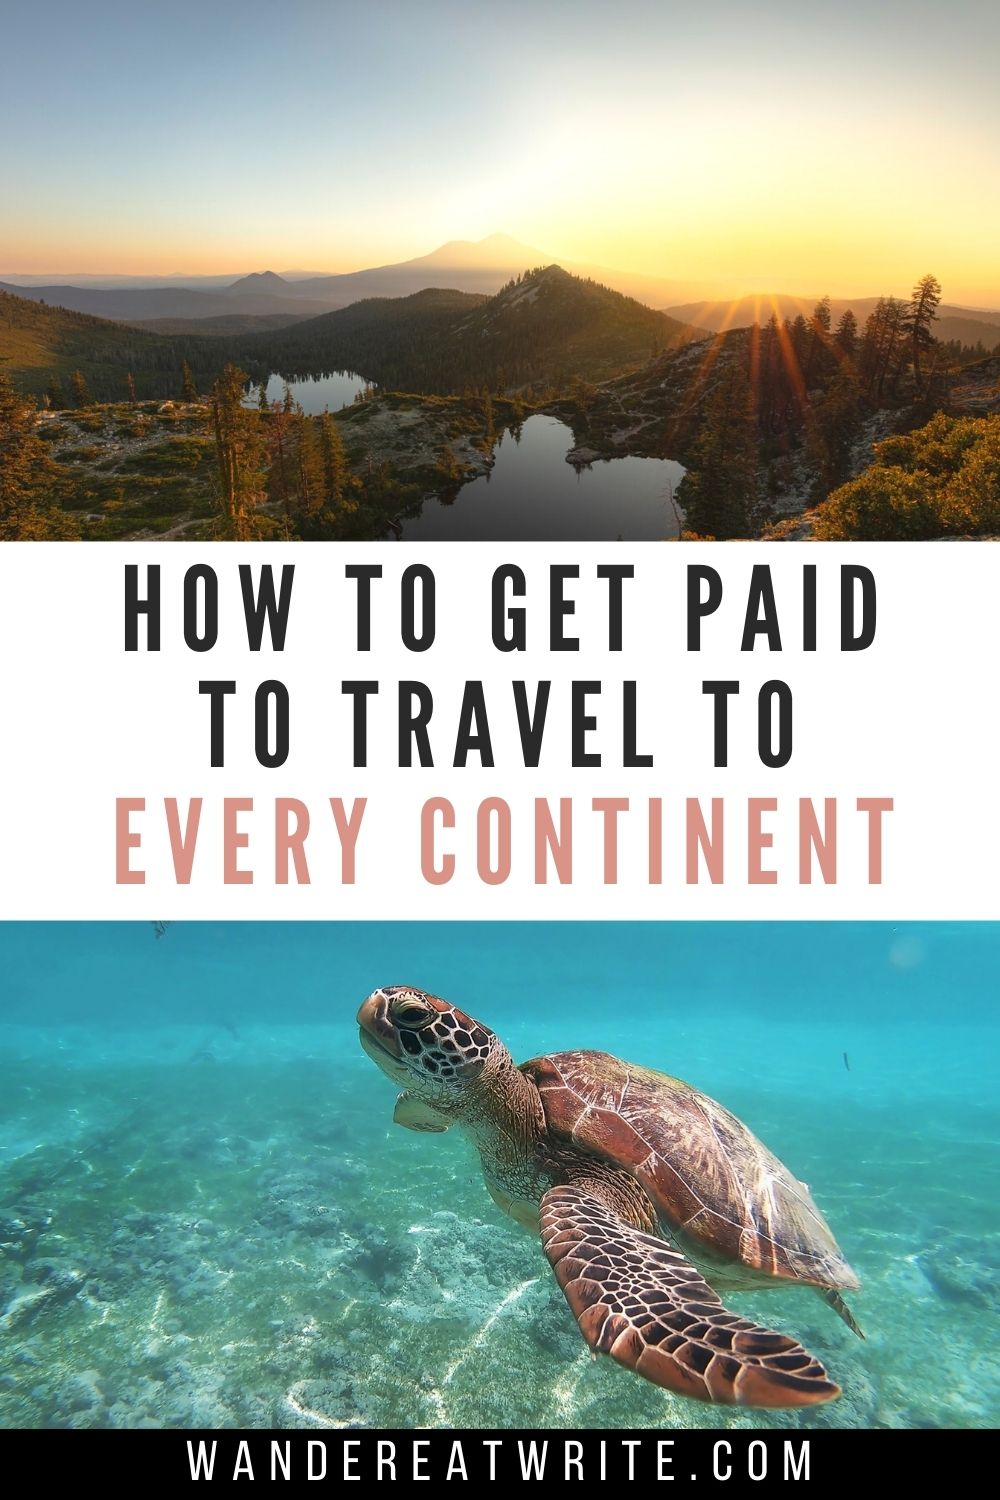 Text: How to get paid to travel to every continent; top photo: mountains, lakes, sunset; bottom photo: sea turtle swimming in green and blue water